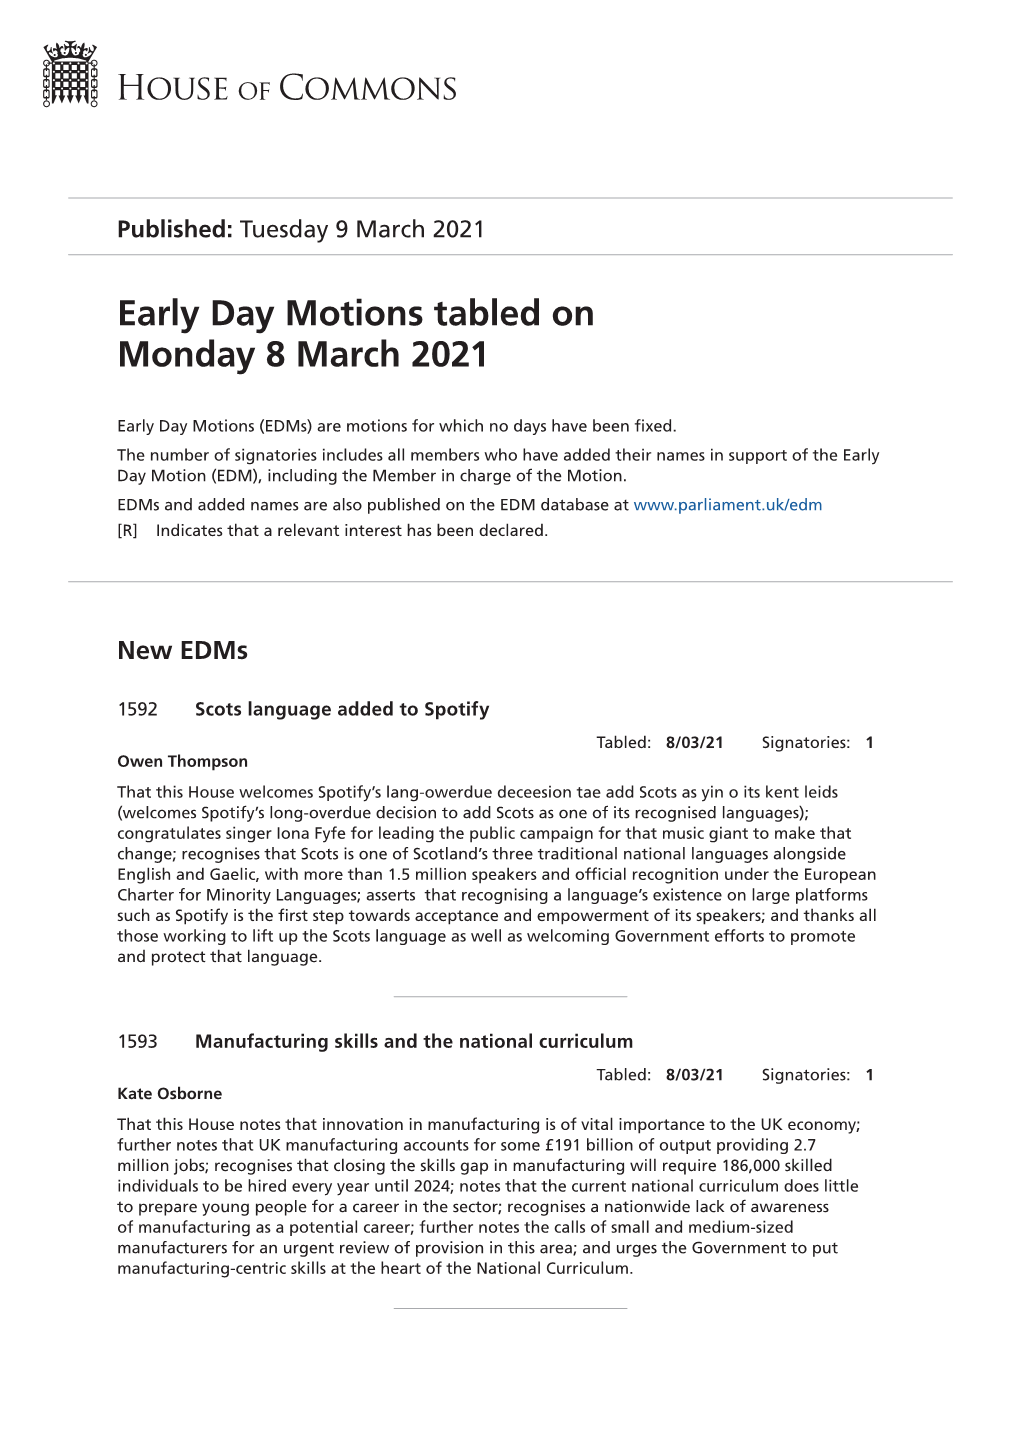 Early Day Motions Tabled on Monday 8 March 2021